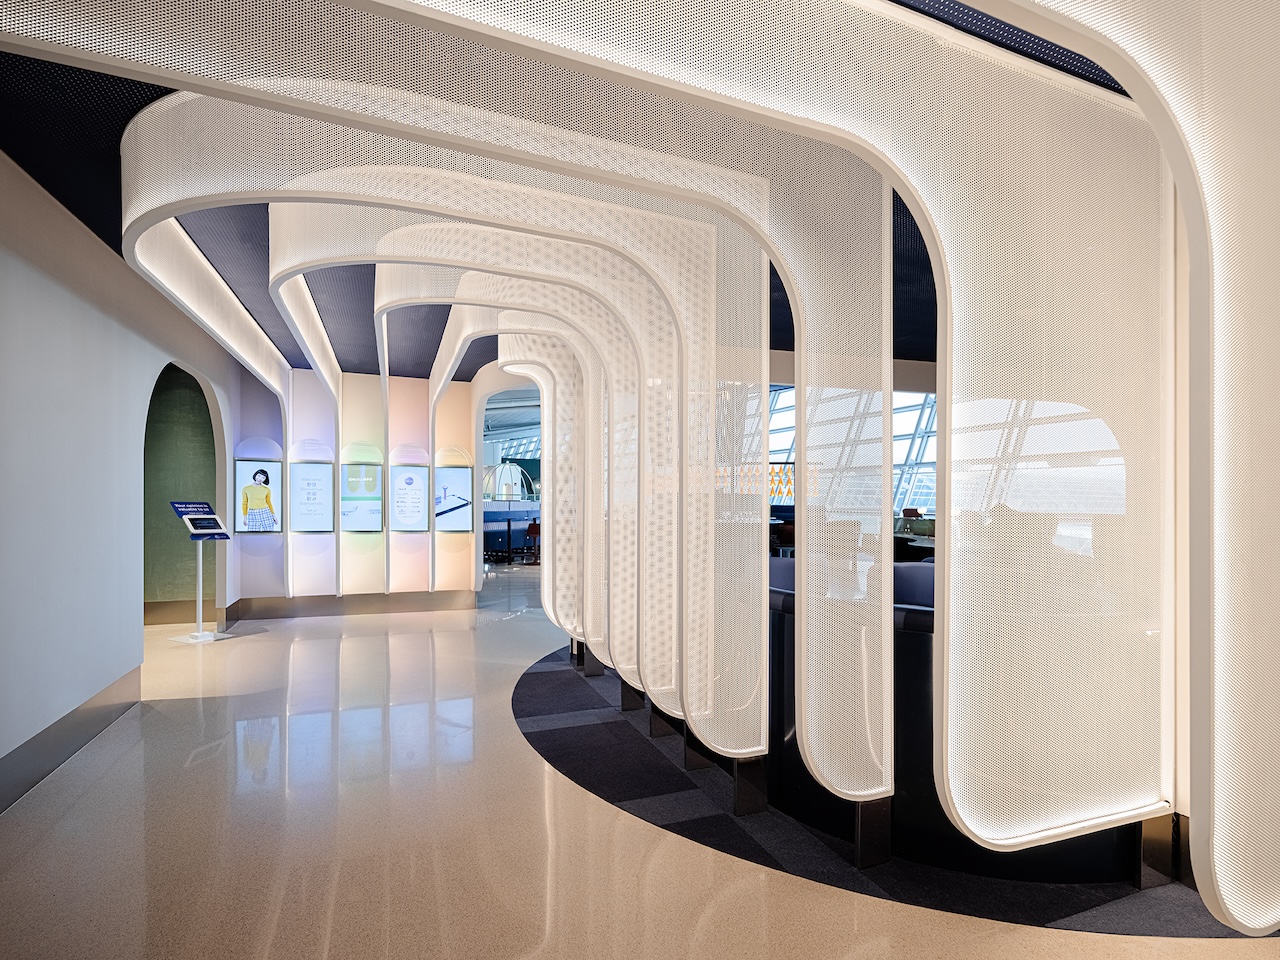 The oneworld alliance has opened its first dedicated lounge at Incheon International, offering a luxurious departure for partner airline guests. 